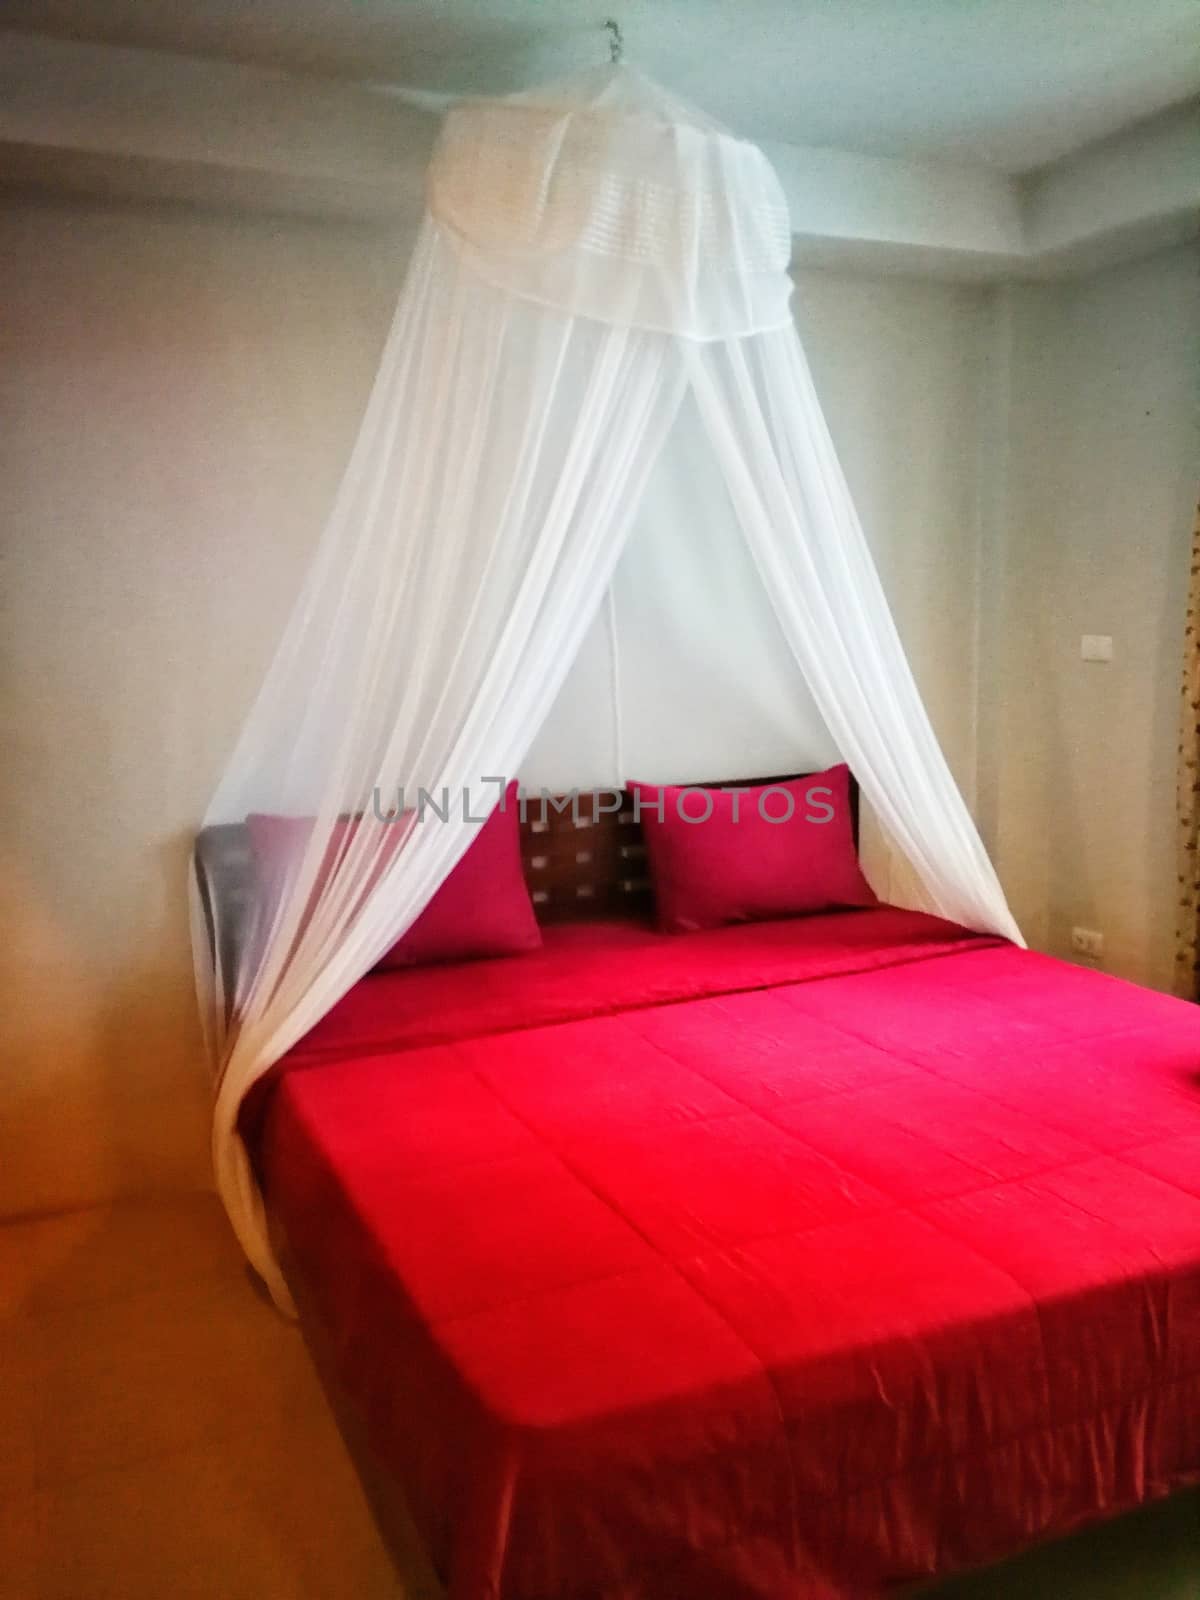 a red bed feeling lonely in a room by shatchaya